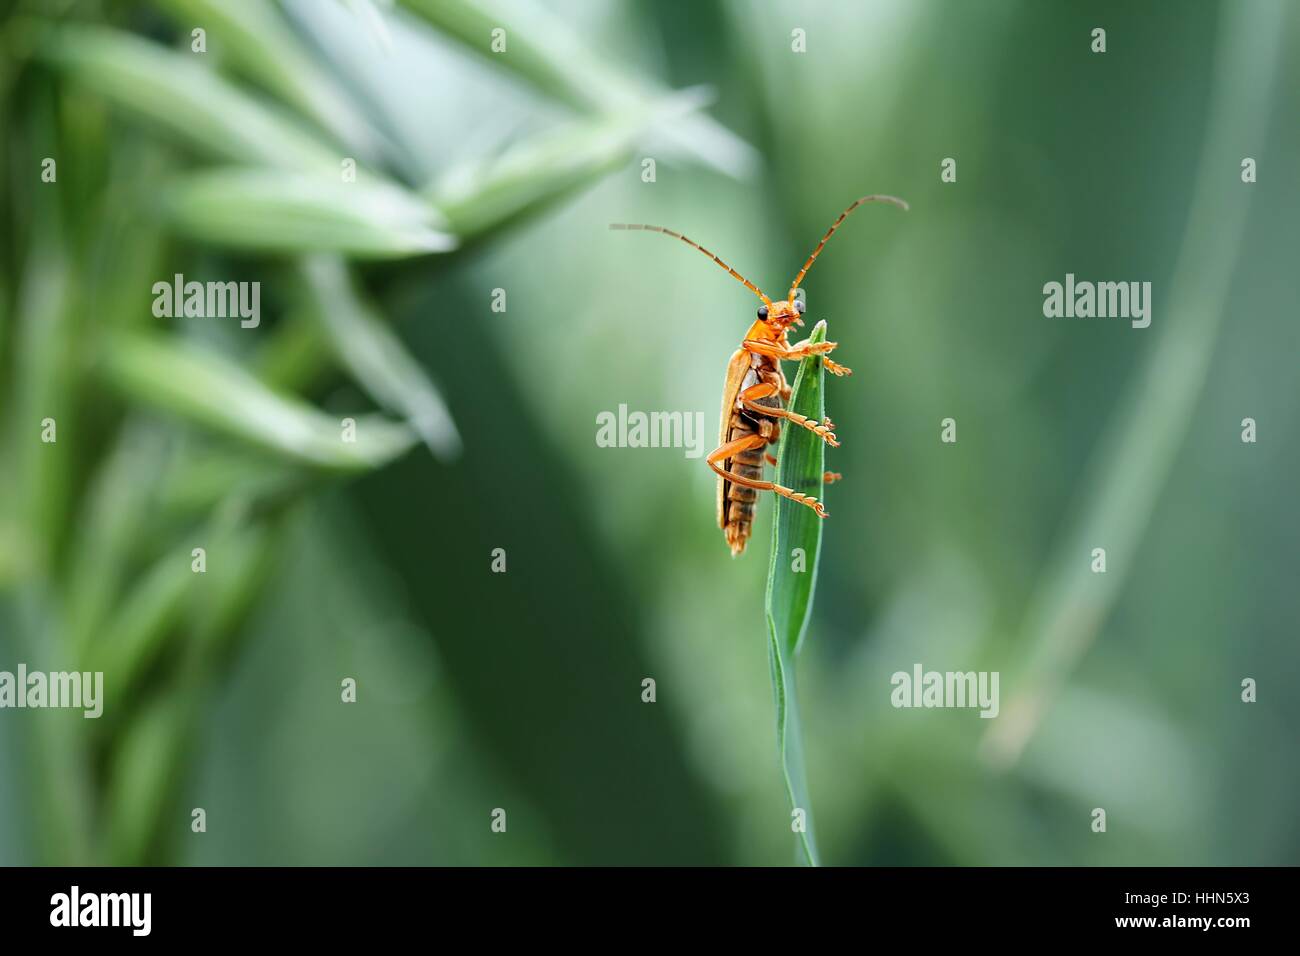 oats, macro, close-up, macro admission, close up view, green, curious, nosey, Stock Photo